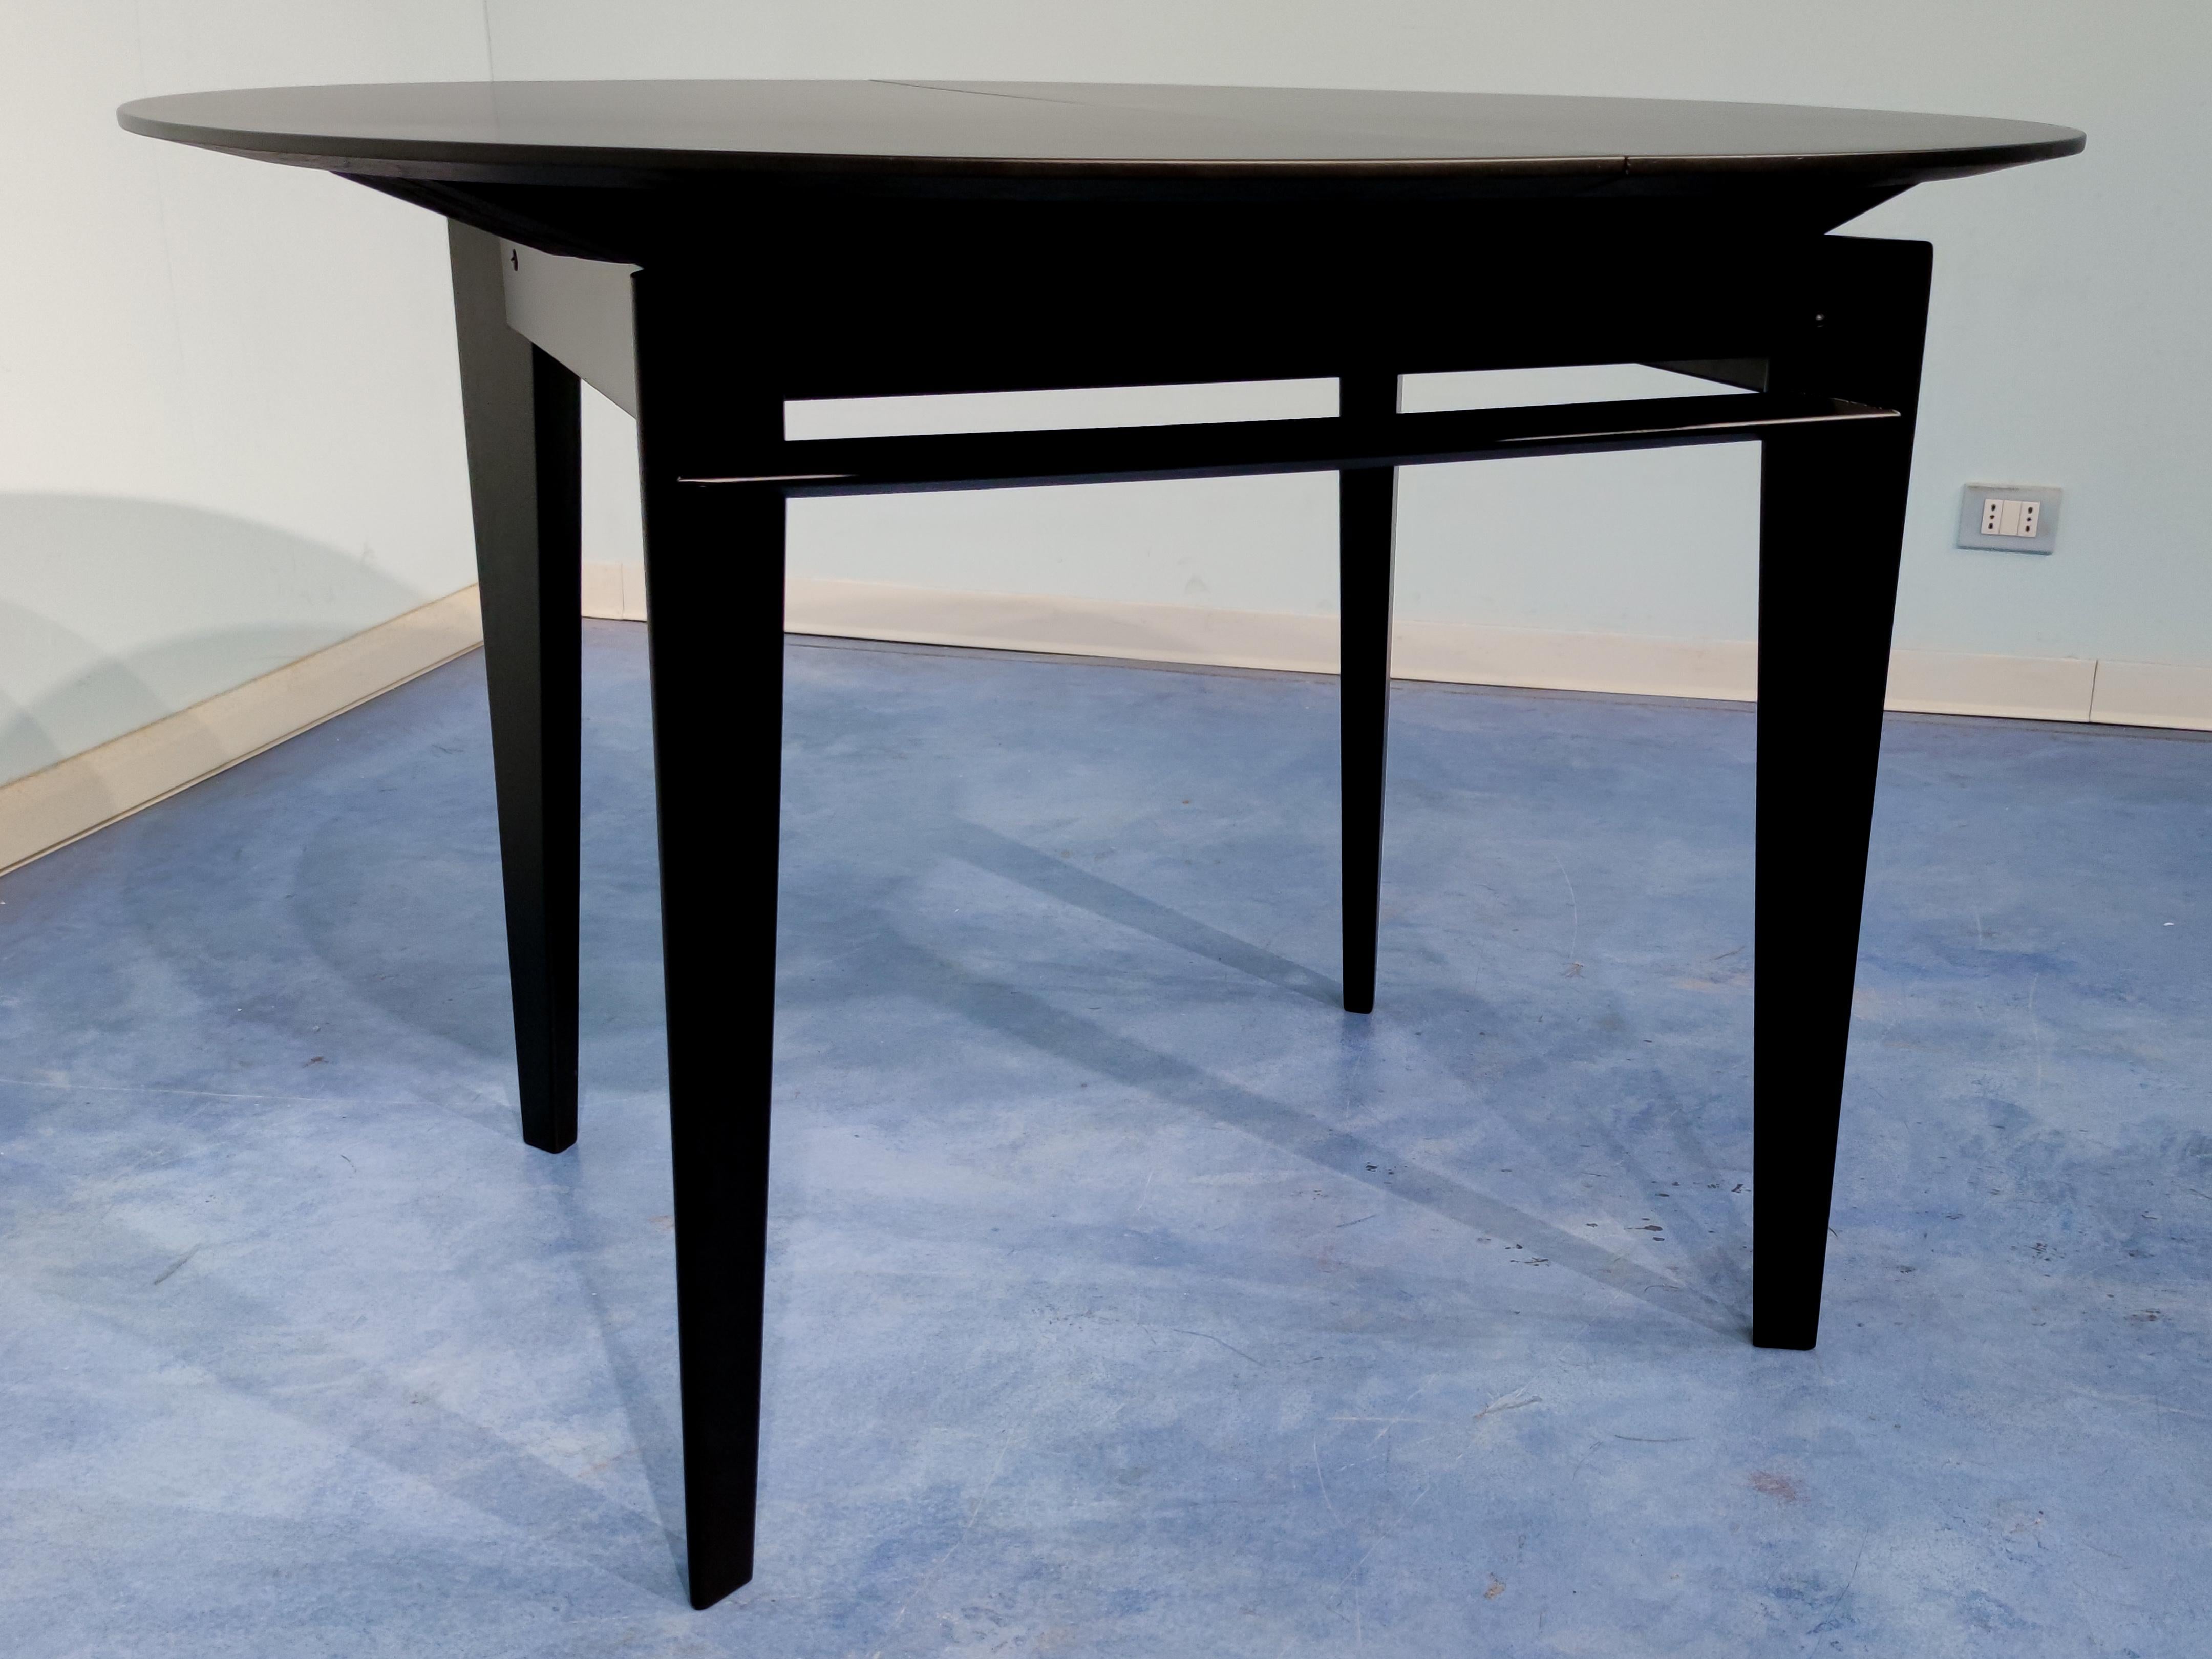 Italian Midcentury Extendable Dining Table by Vittorio Dassi, 1950s For Sale 2